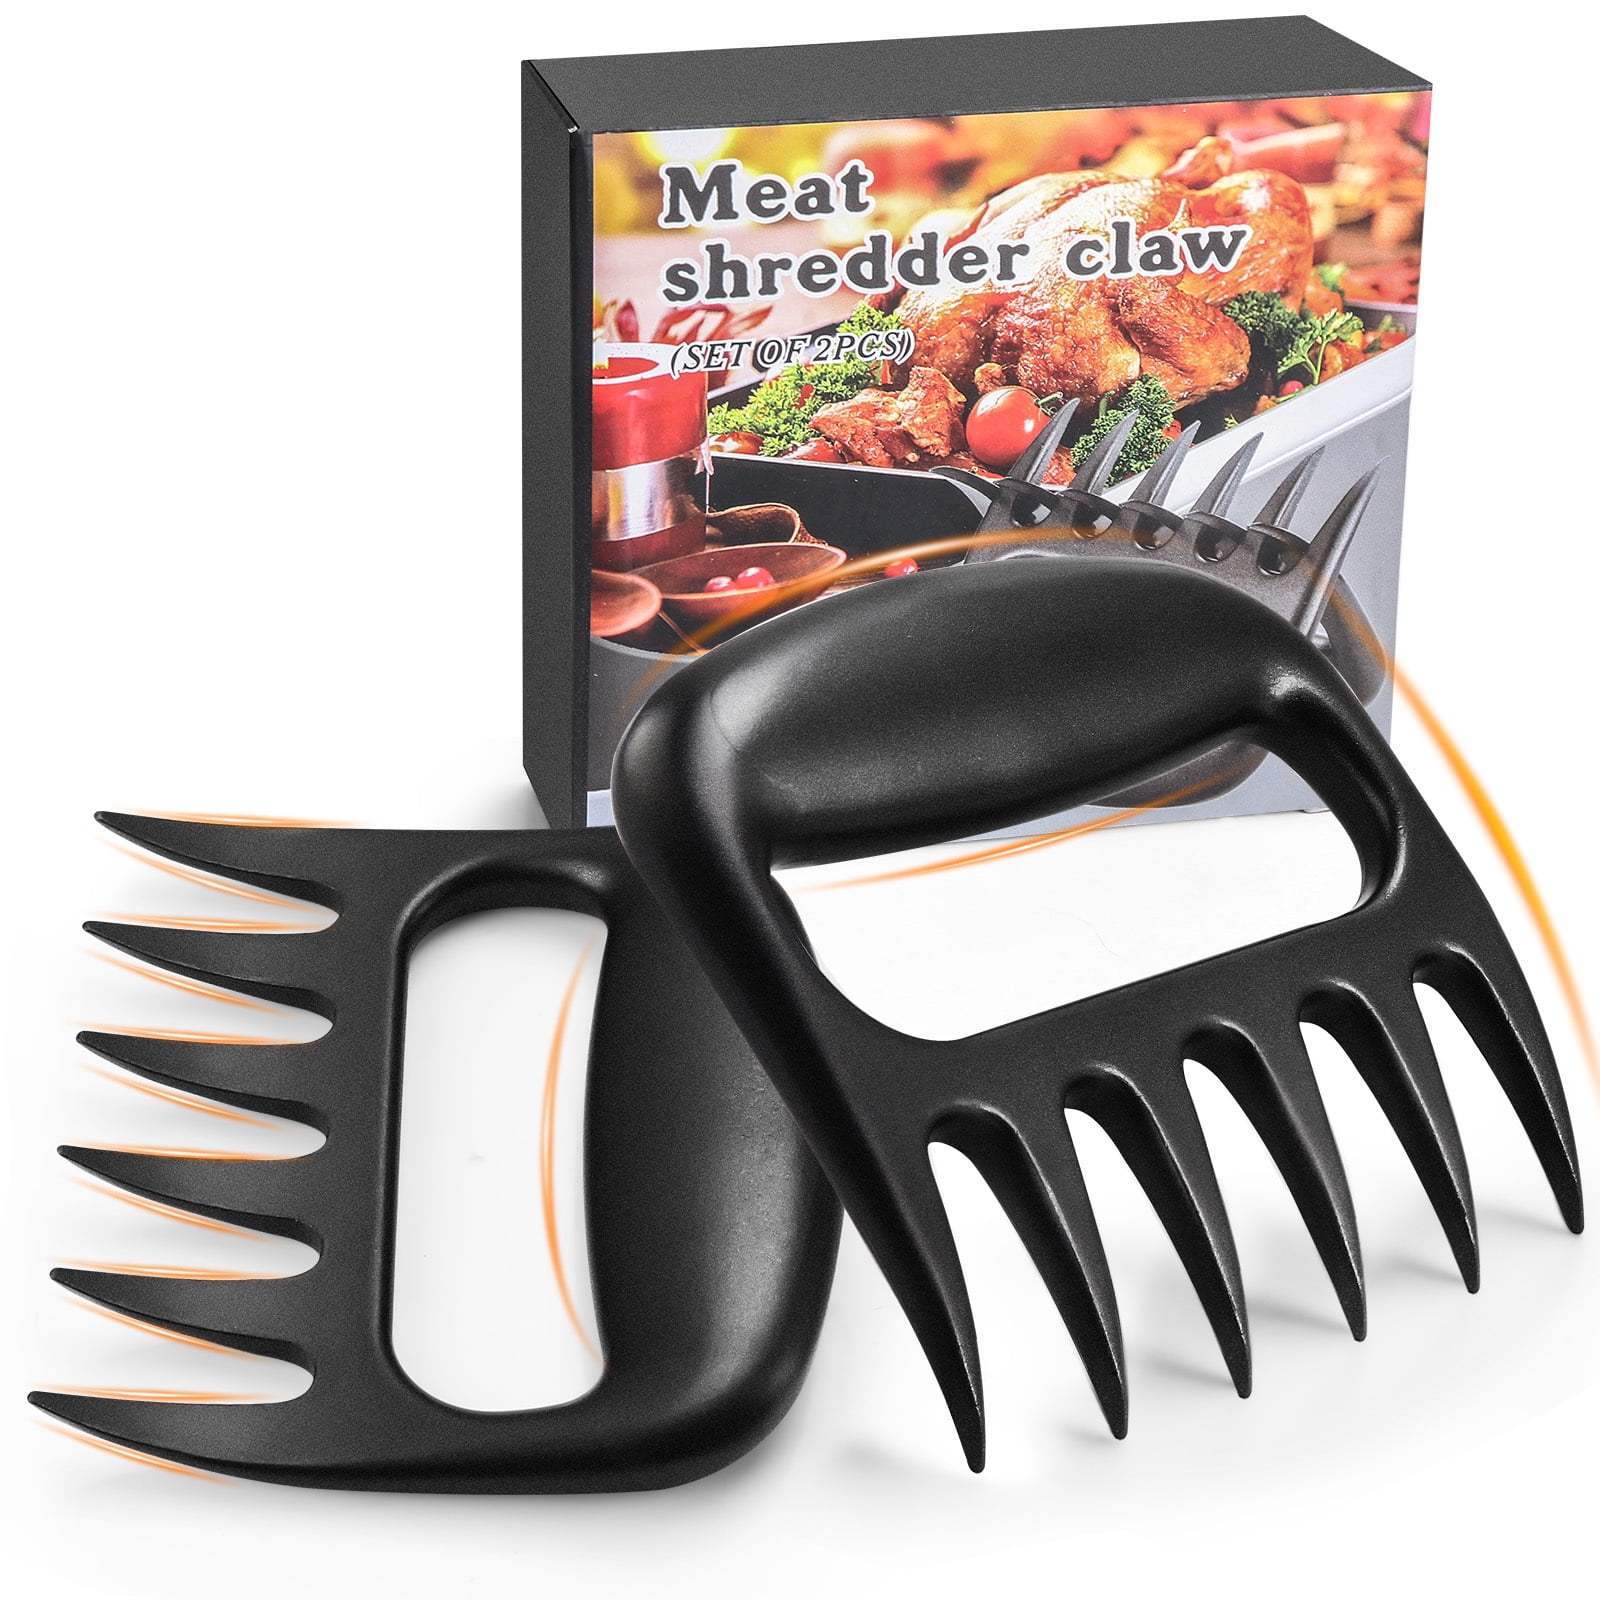 BBQ Bear Claws Meat Shredder,Kitchen Tools Metal Meat Claws-Easily Lift Handle Shred Cut Meats,Grilling Accessories Stainless Steel Meat Paws Separator For Shredding Pork Turkey Chicken Brisket Beef 